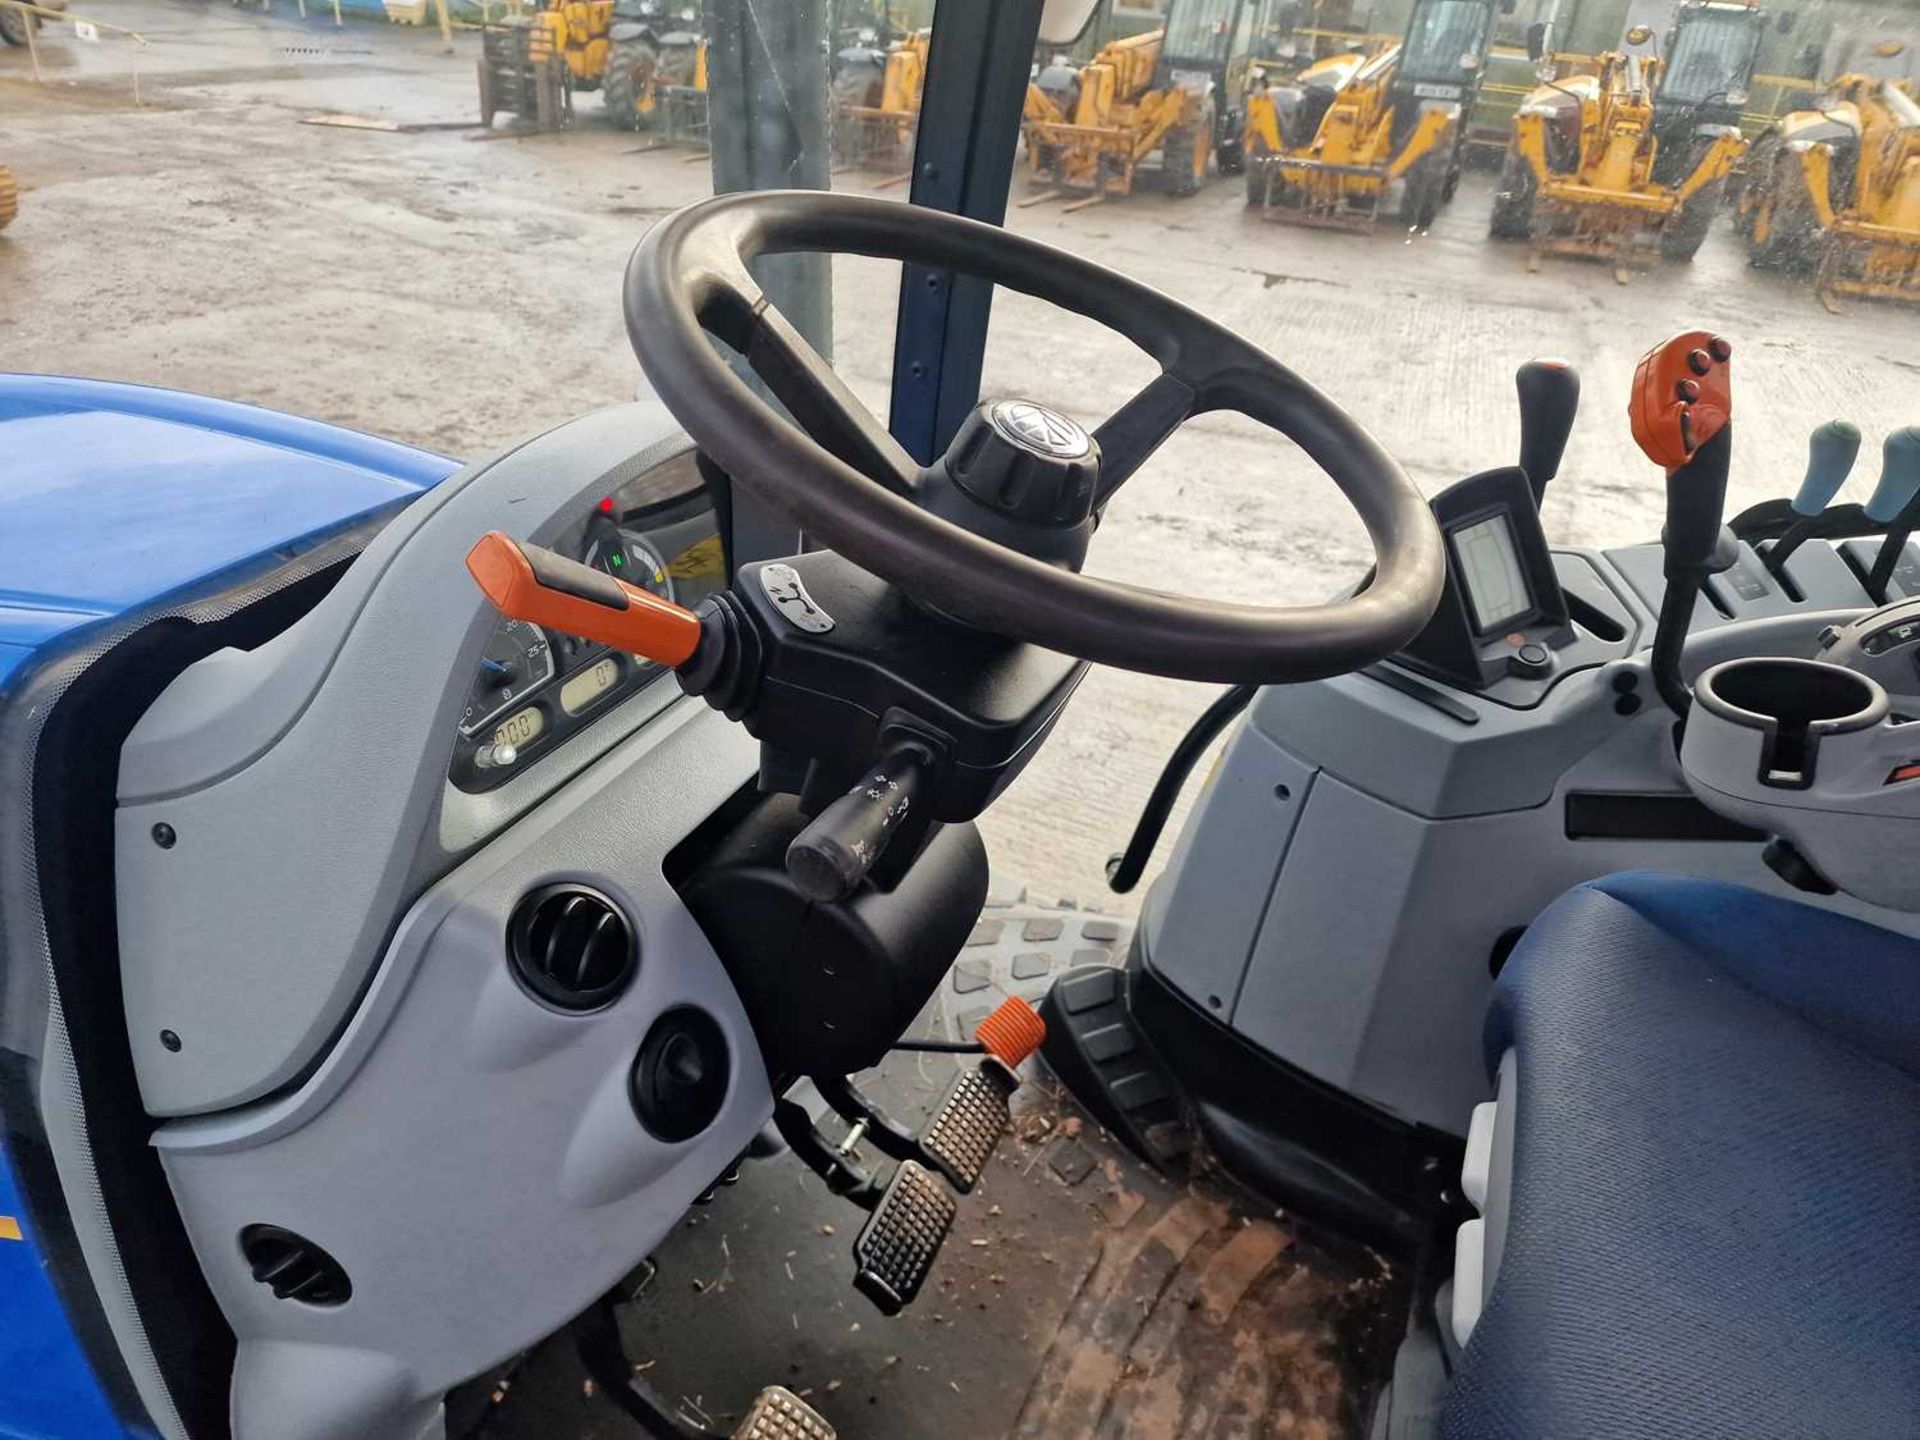 2019 New Holland T6.180 4WD Tractor, Cab Suspension, 3 Spool Valves, Push Out Hitch, A/C - Image 23 of 28